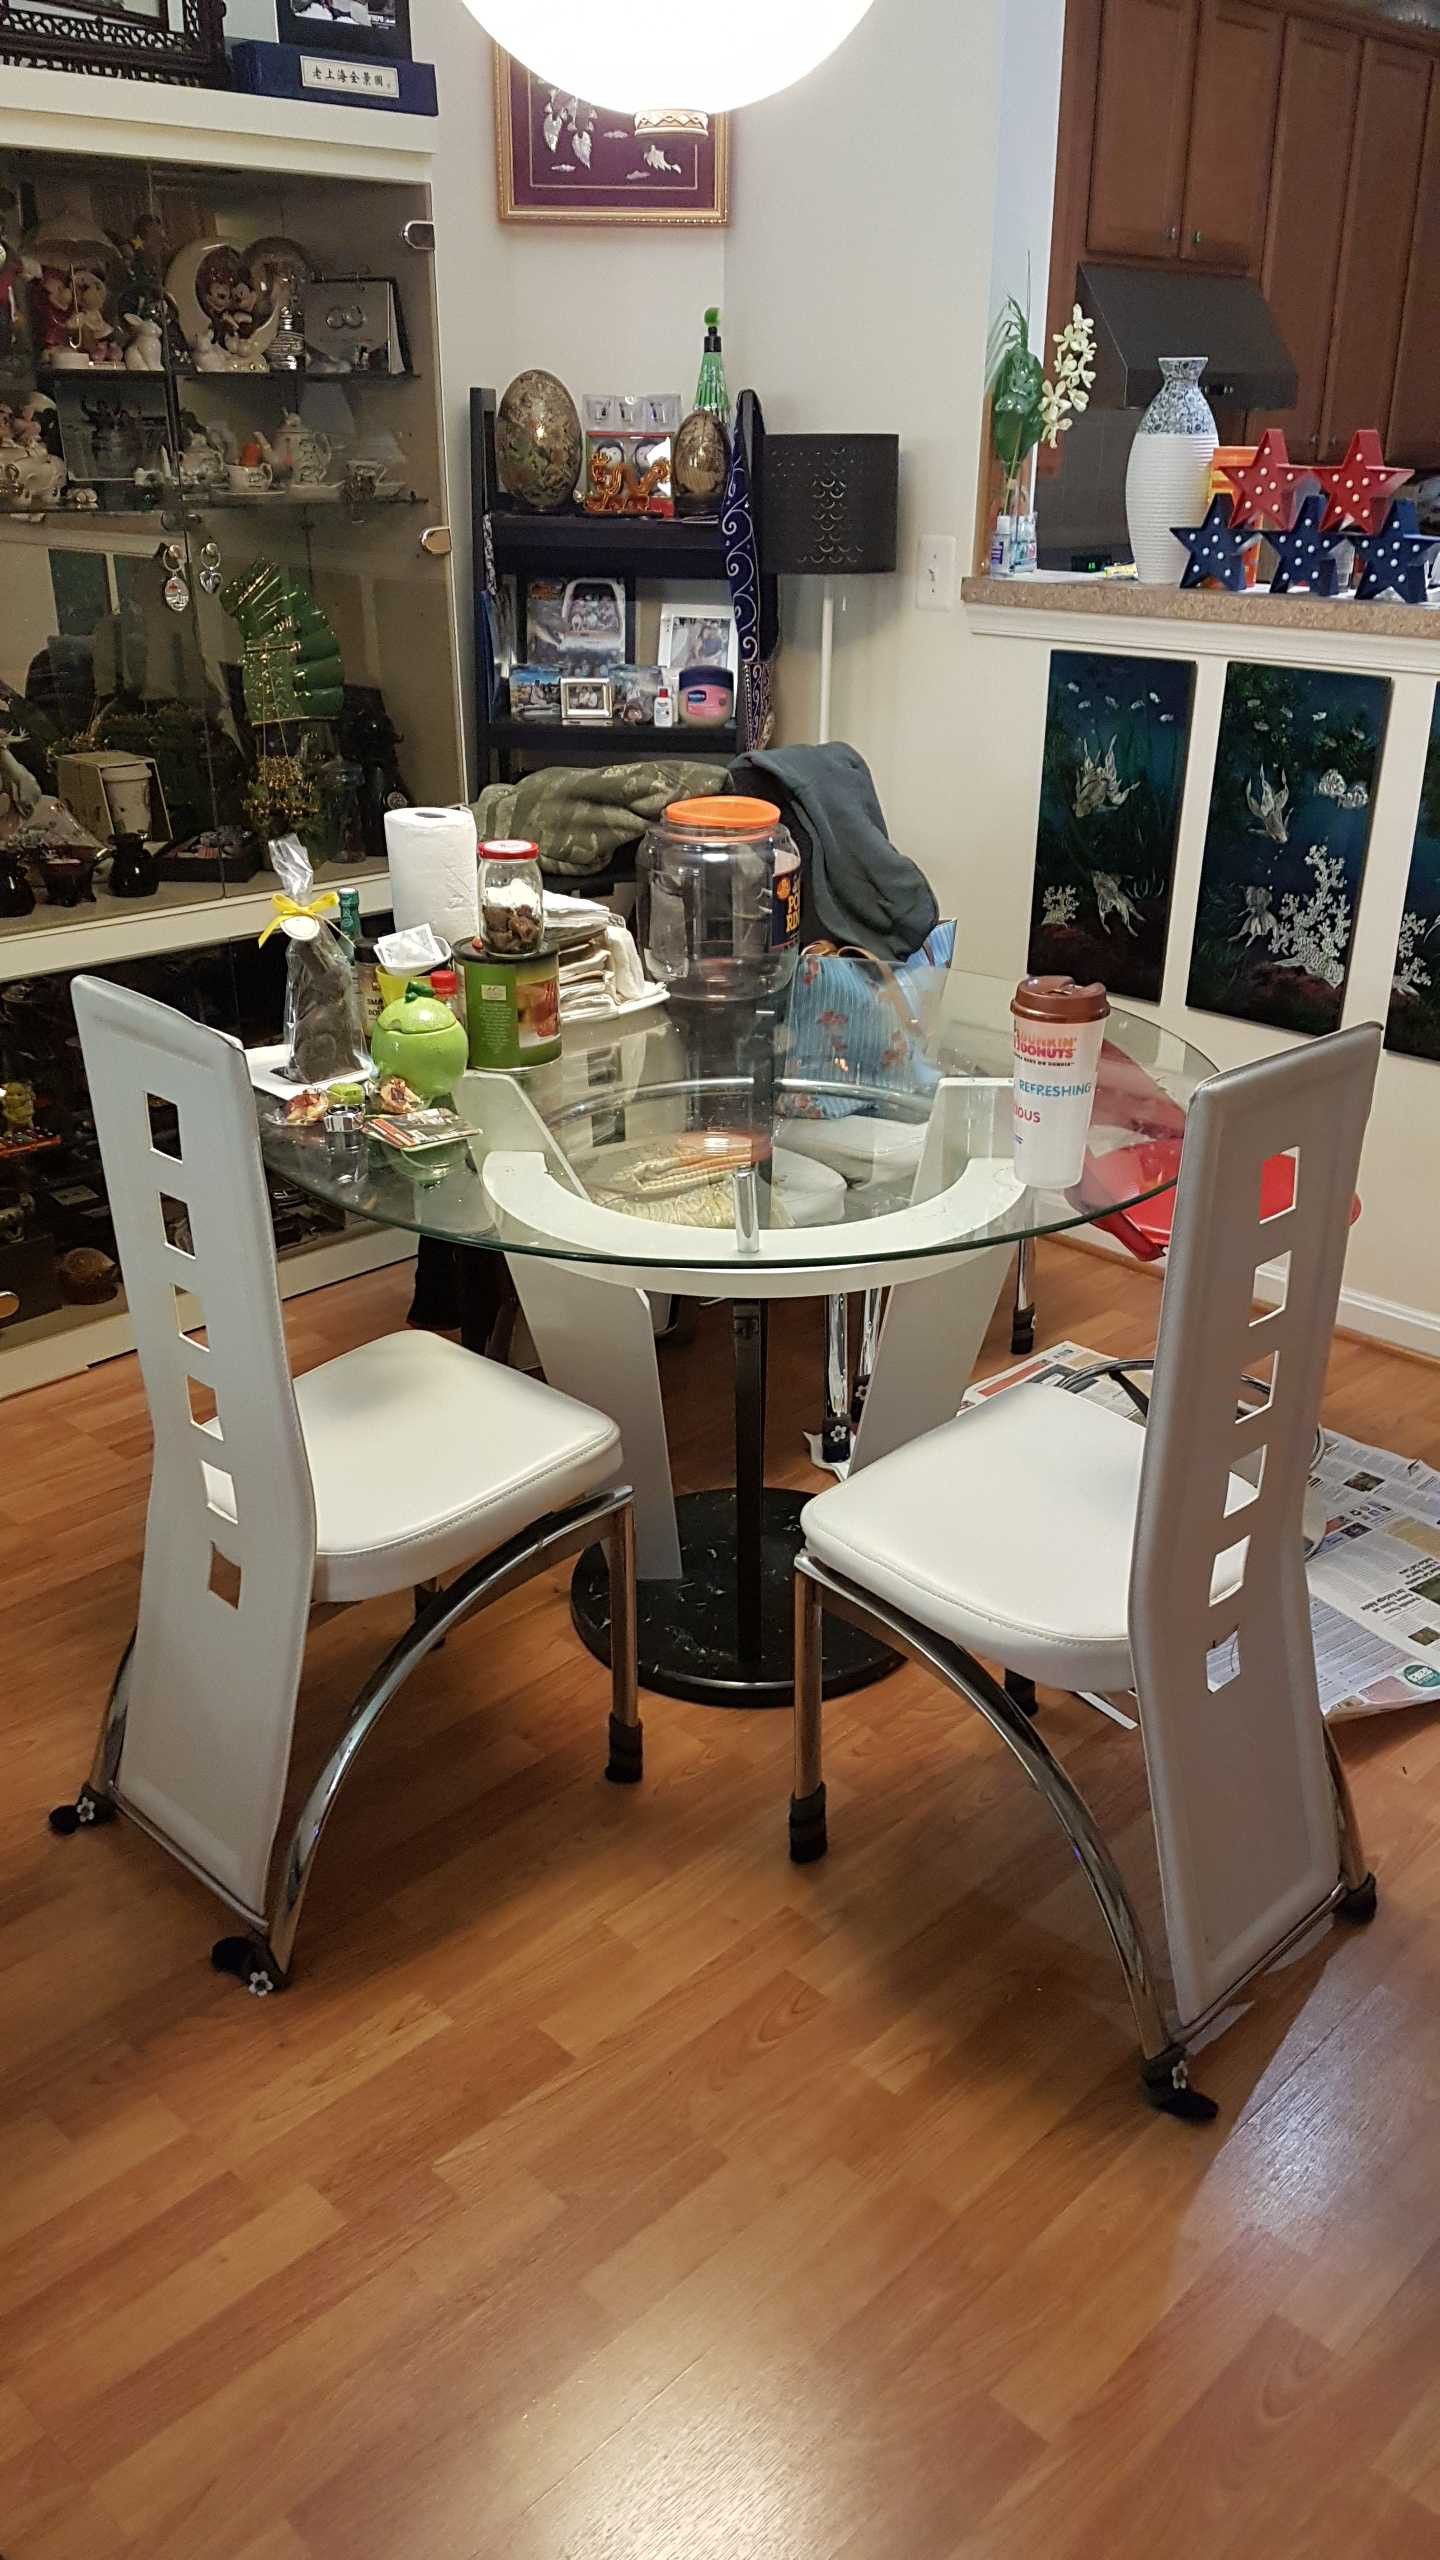 Dining room table for 4 $200